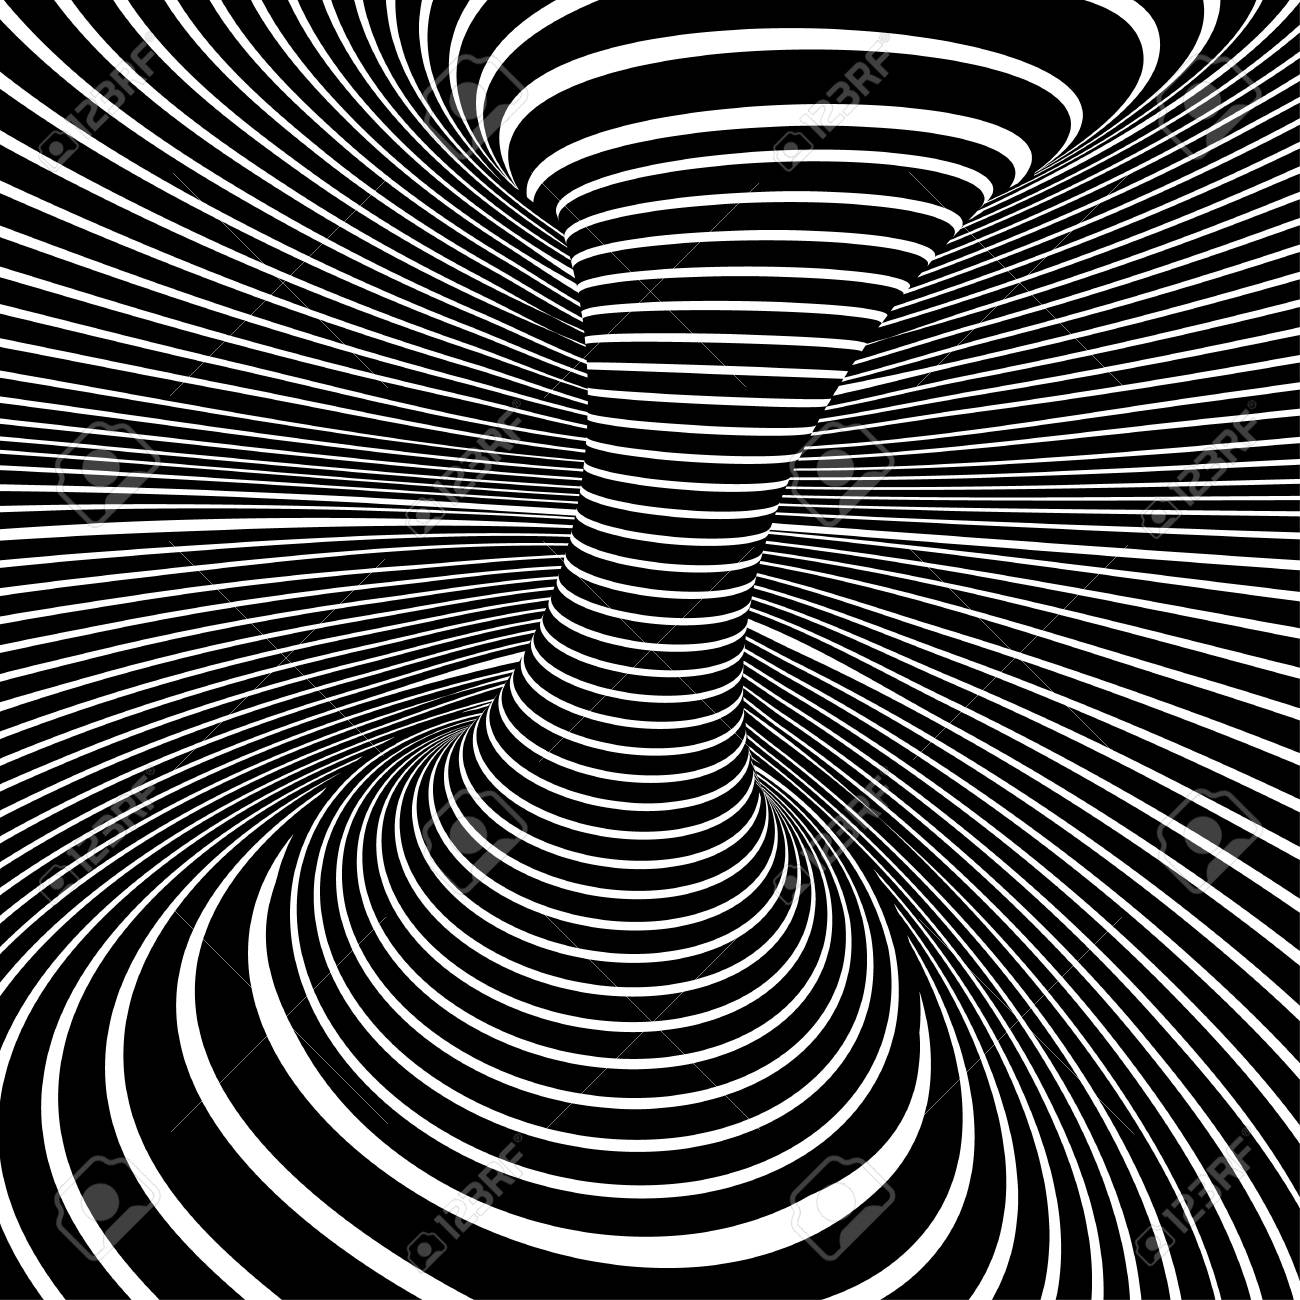 80177749-vector-op-art-pattern-optical-illusion-abstract-background-.jpg